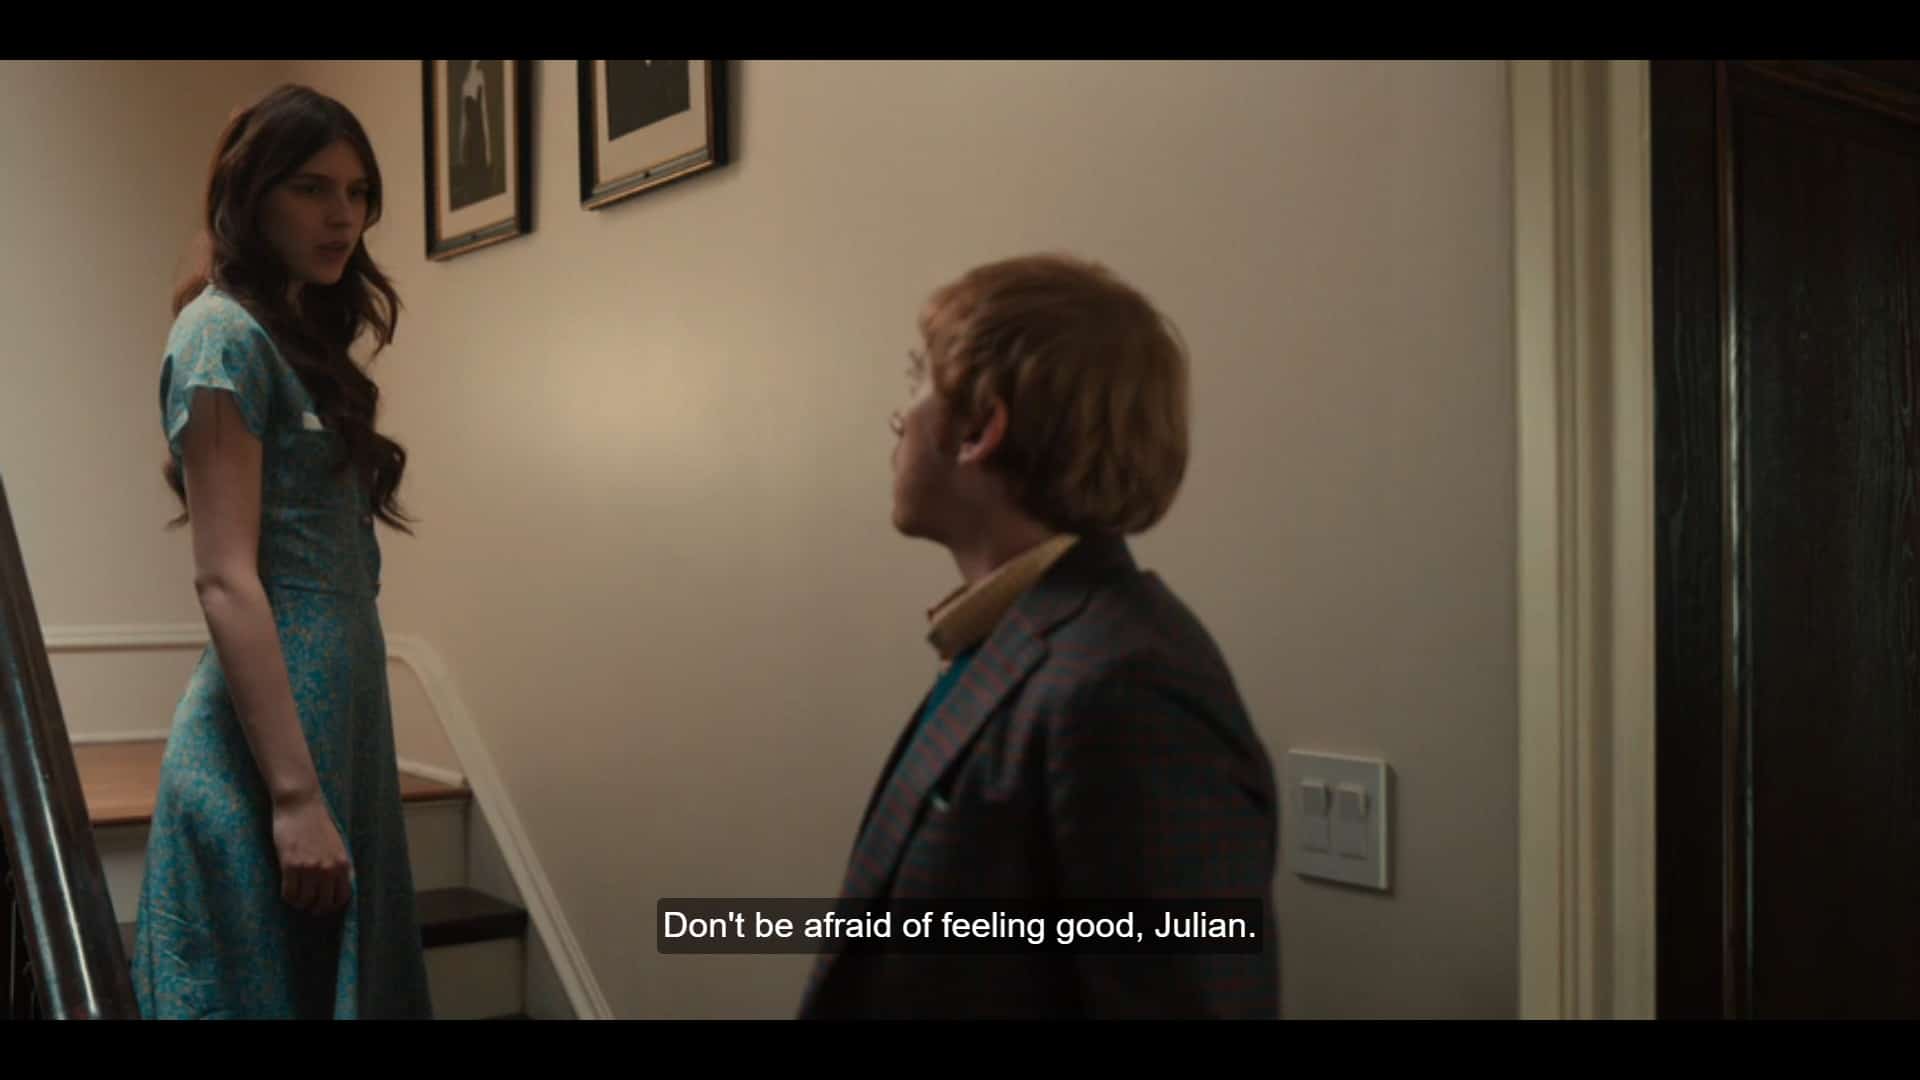 Leanne subtly inviting Julian upstairs